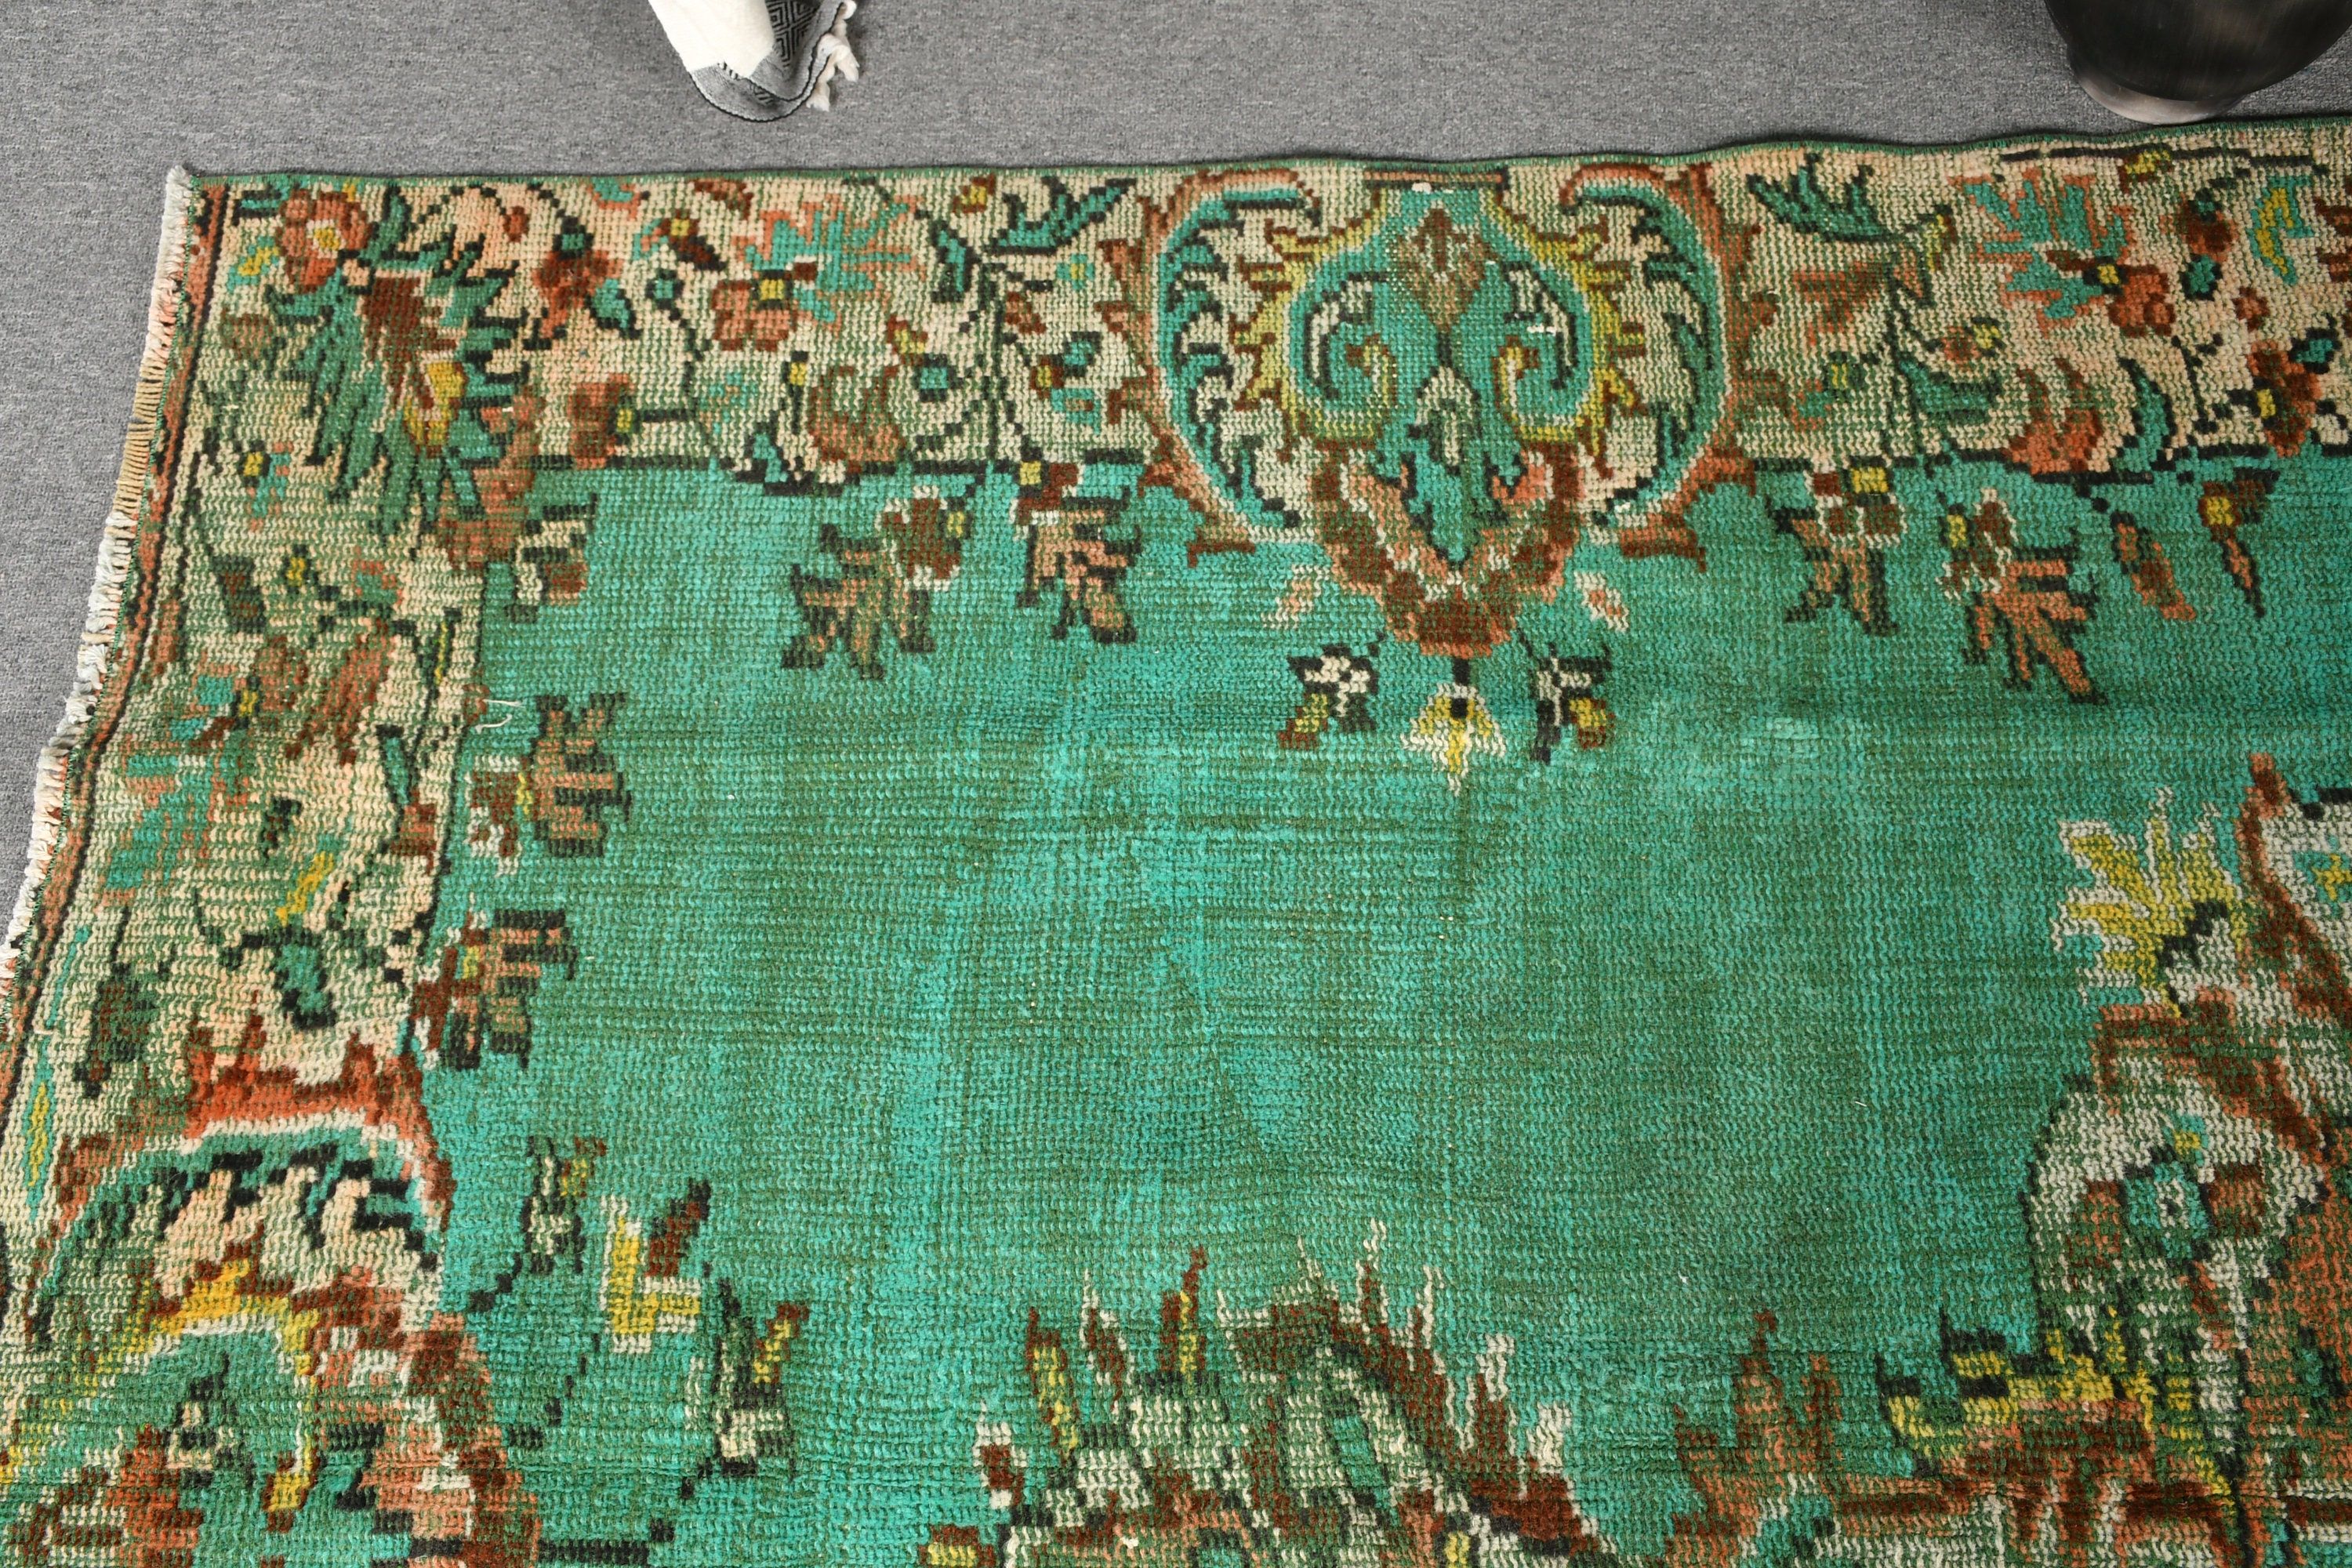 Living Room Rug, Green  4.9x8.4 ft Large Rugs, Kitchen Rugs, Wool Rug, Rugs for Salon, Turkish Rugs, Vintage Rugs, Salon Rug